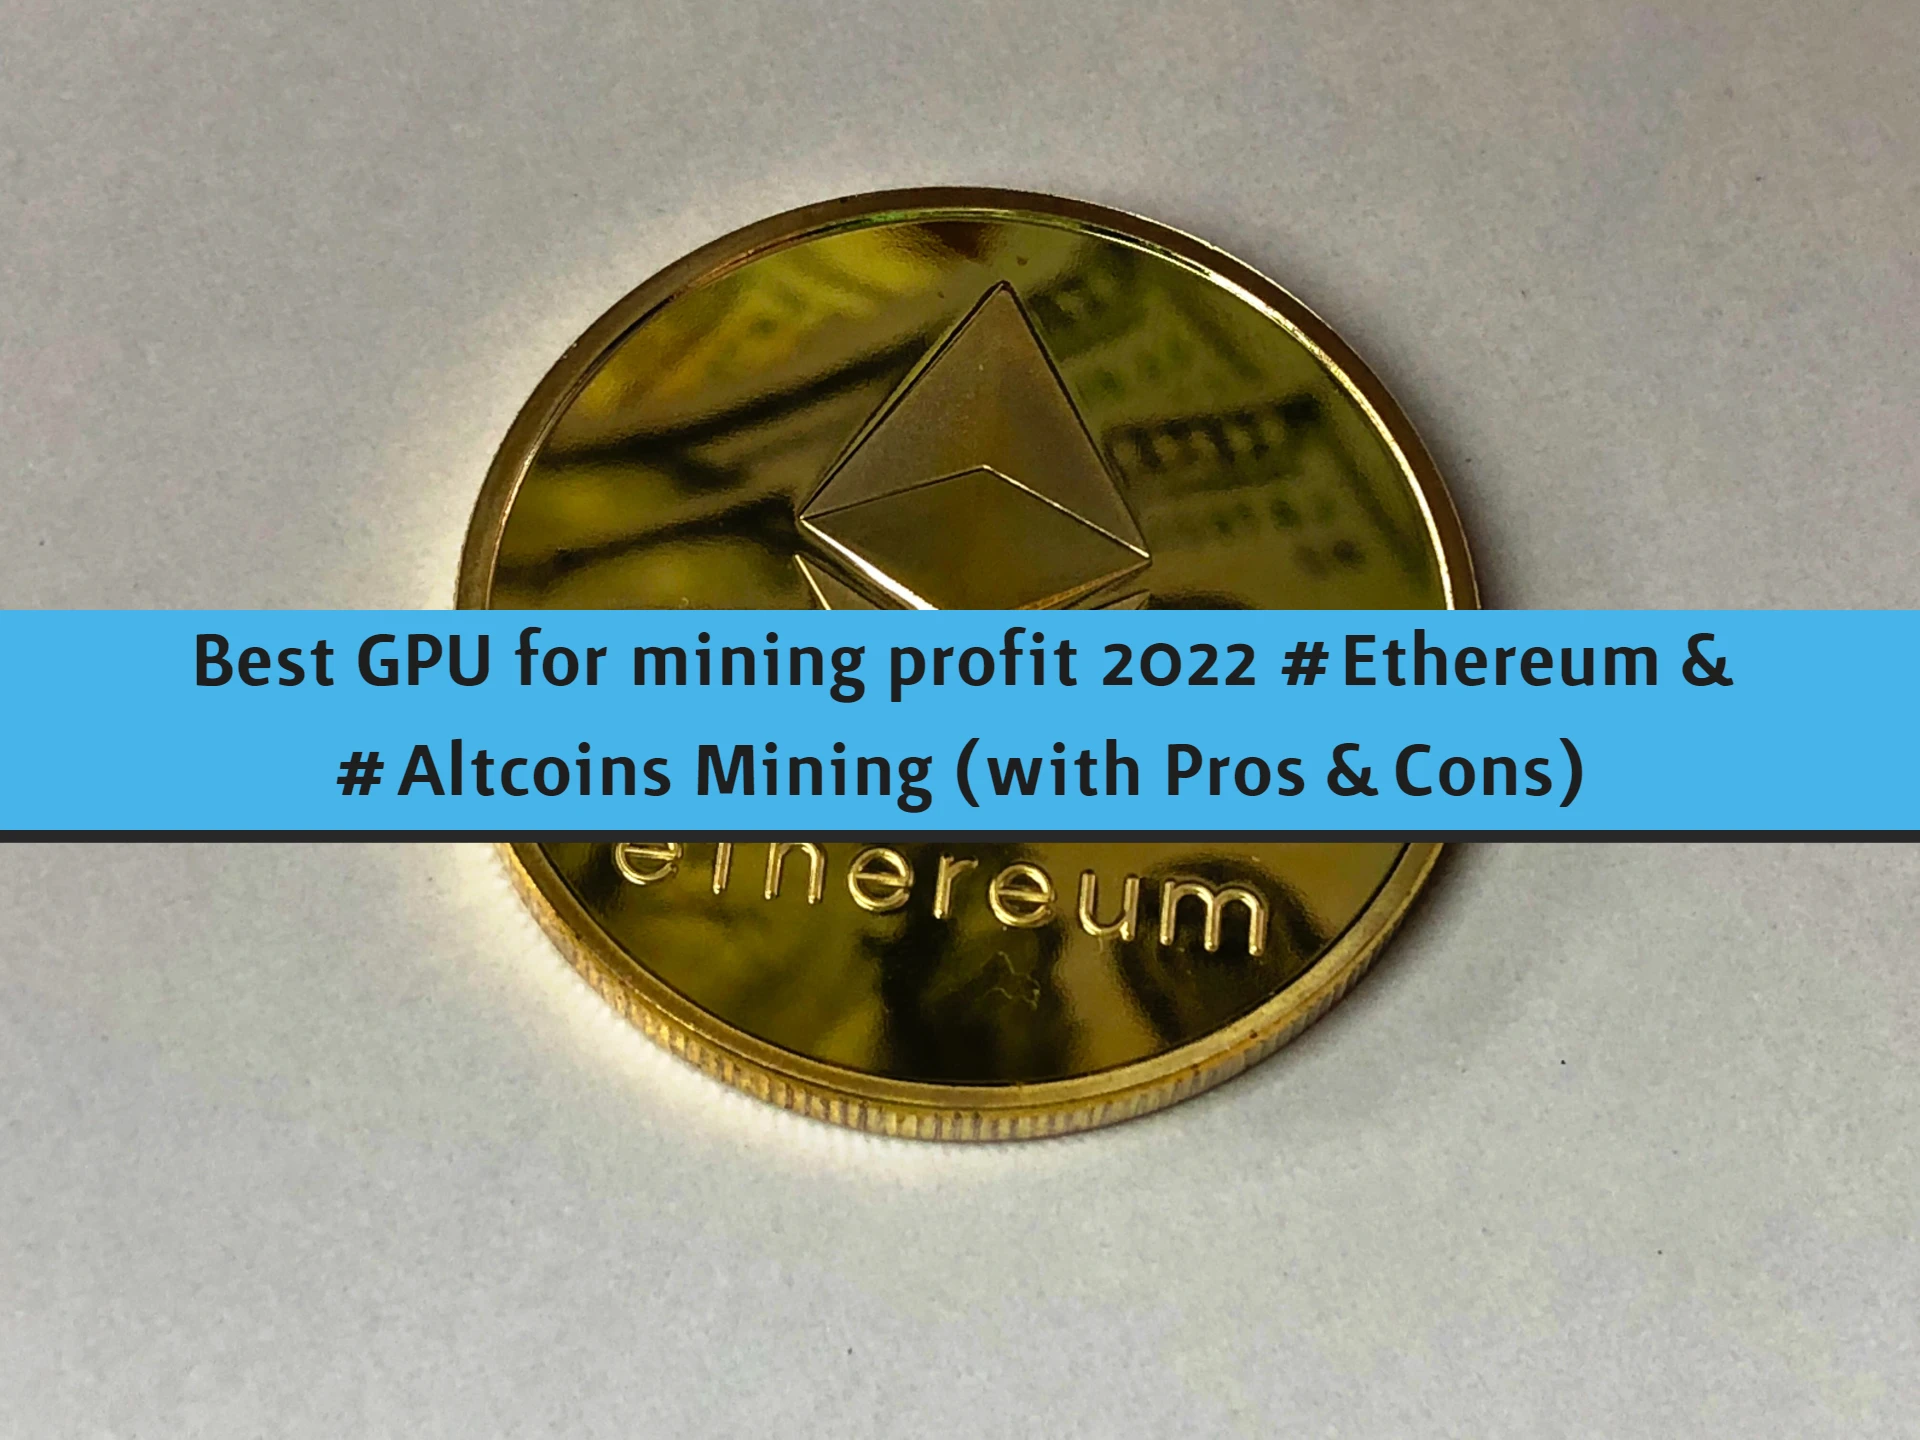 Best GPU for mining profit 2022 #Ethereum & #Altcoins Mining (with Pros & Cons)